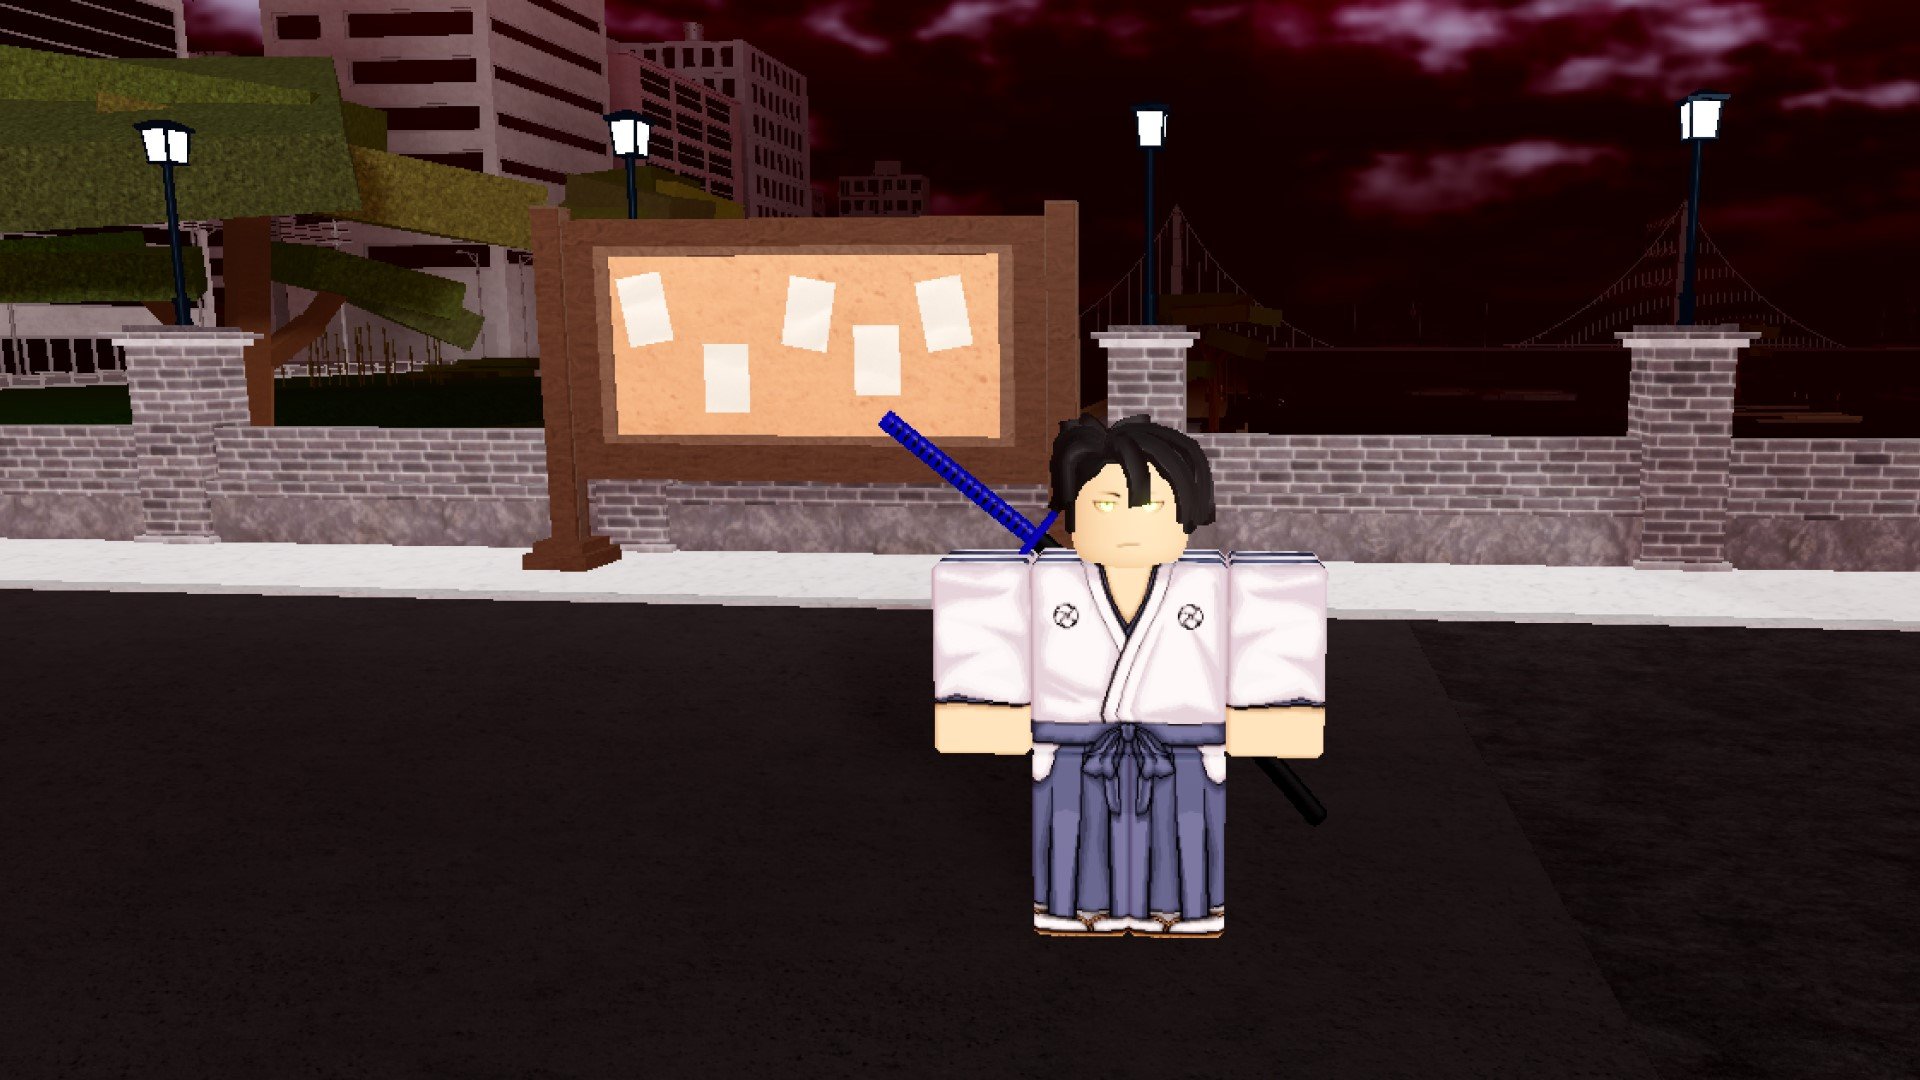 A character from Roblox game Type Soul standing in front of a notice board in an urban area.